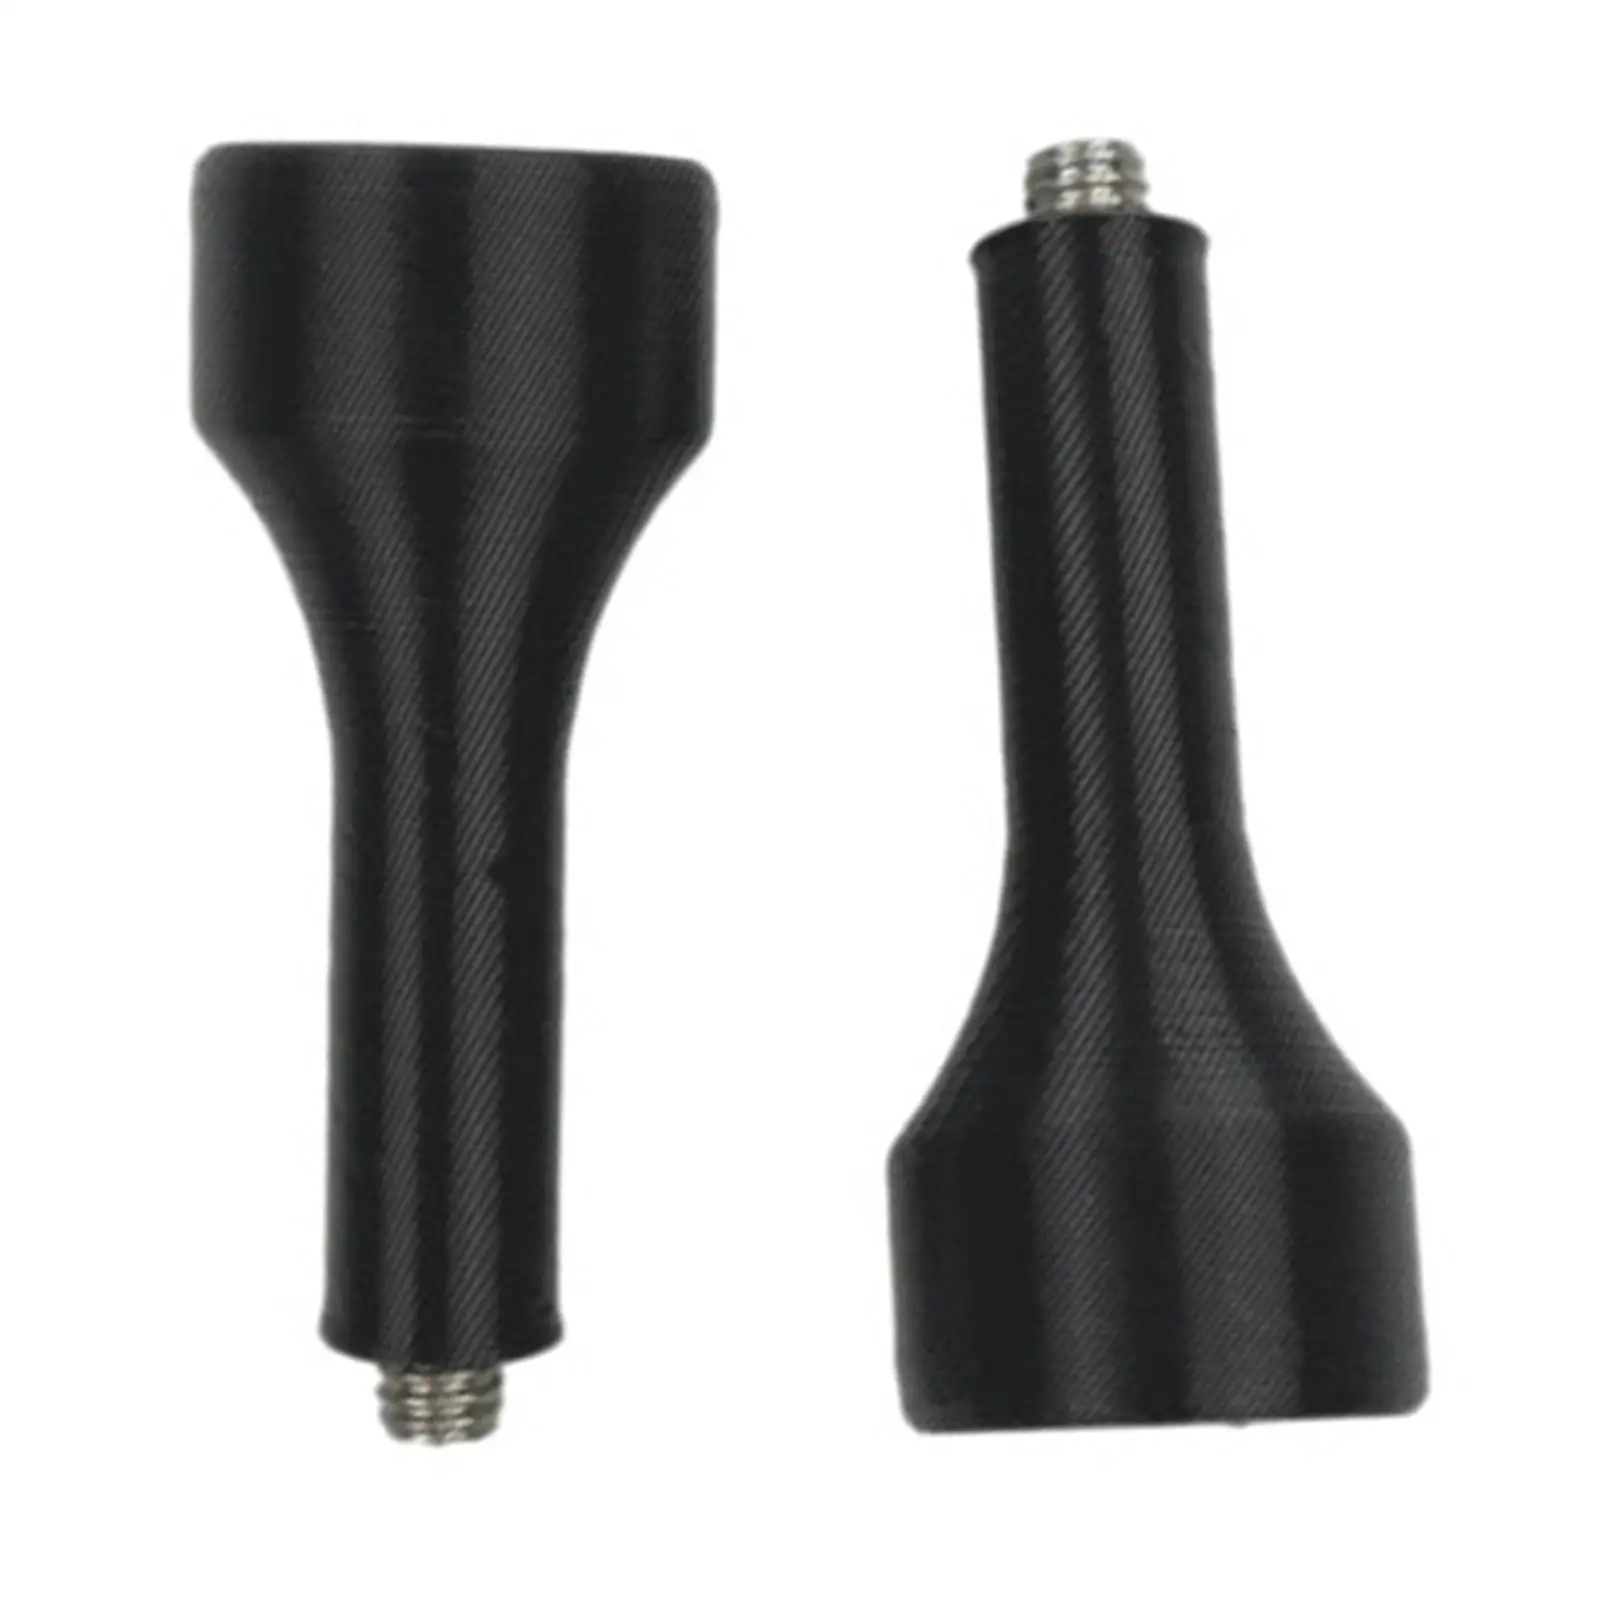 2 Pieces Compatible Extended Thumb Rocker for Remote Control Mini 3 Pro Air 2/2S